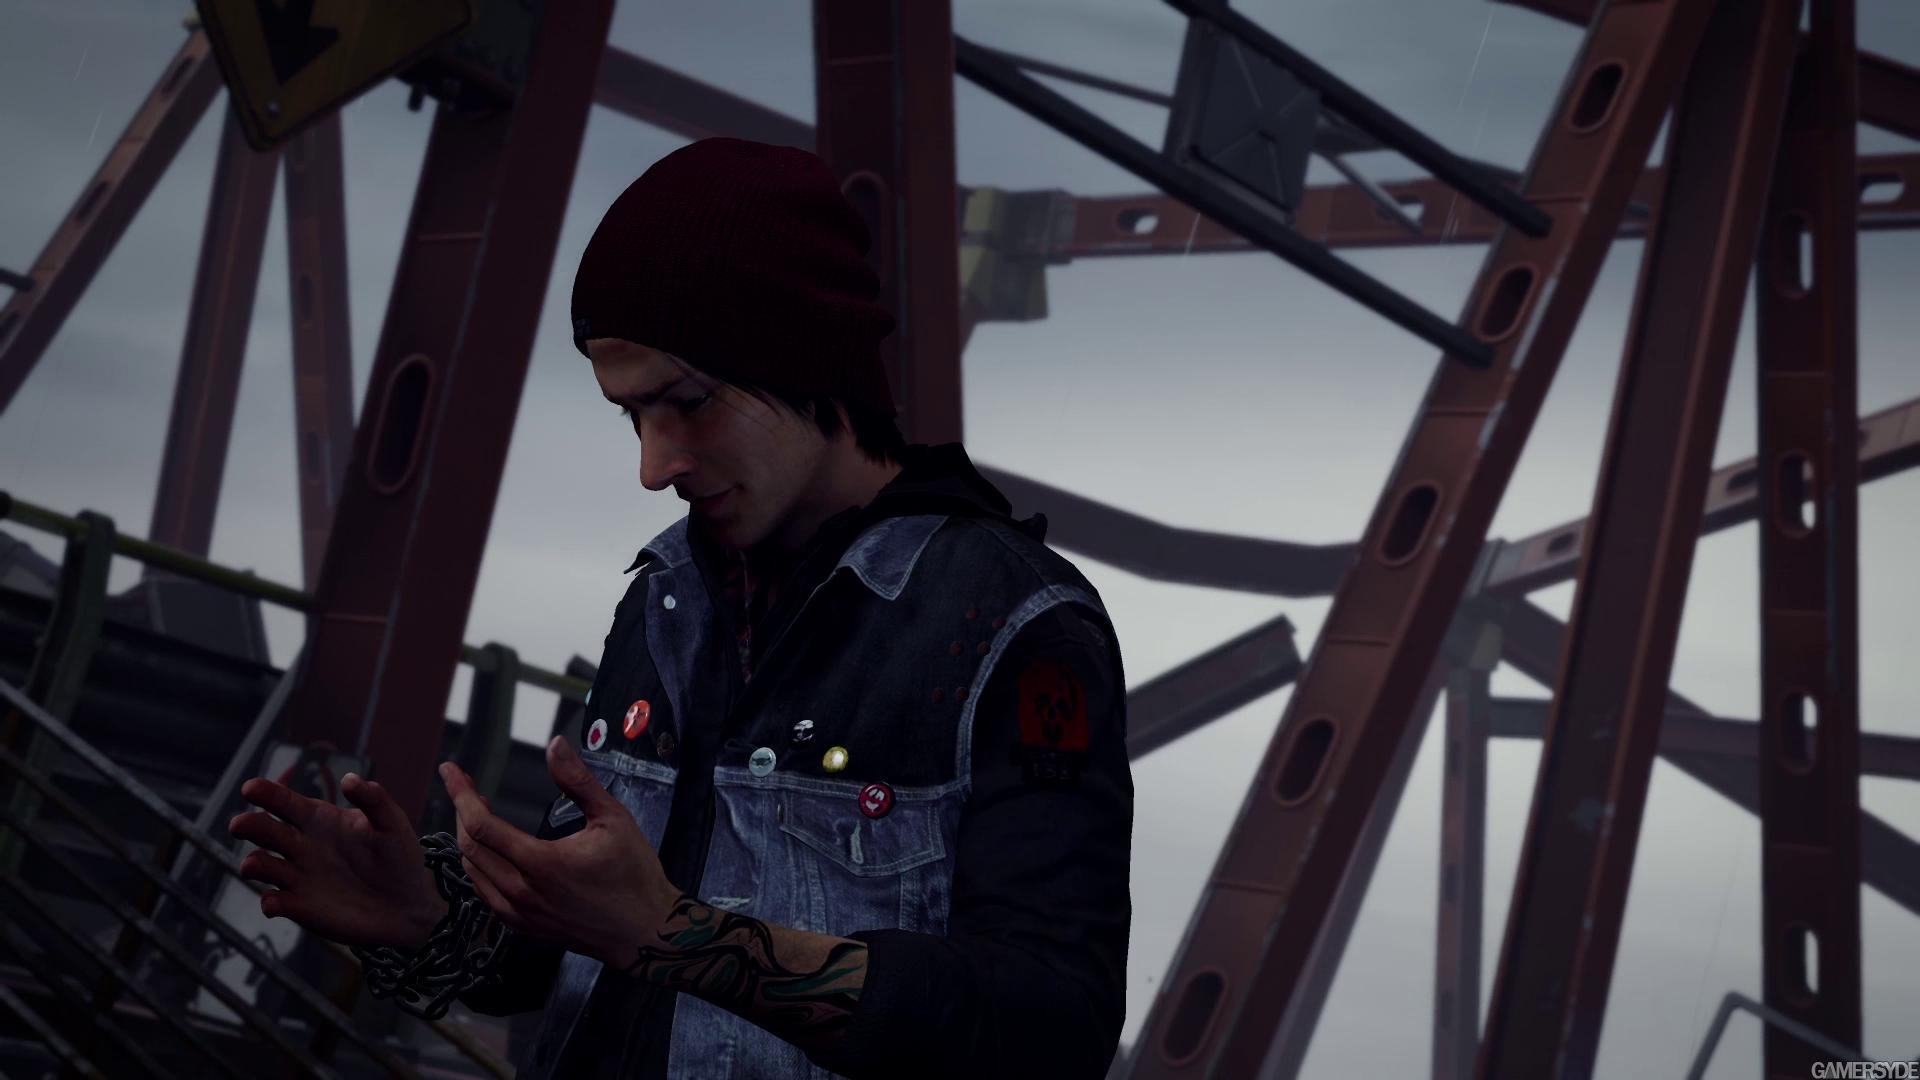 image_infamous_second_son-22310-2661_0008.jpg